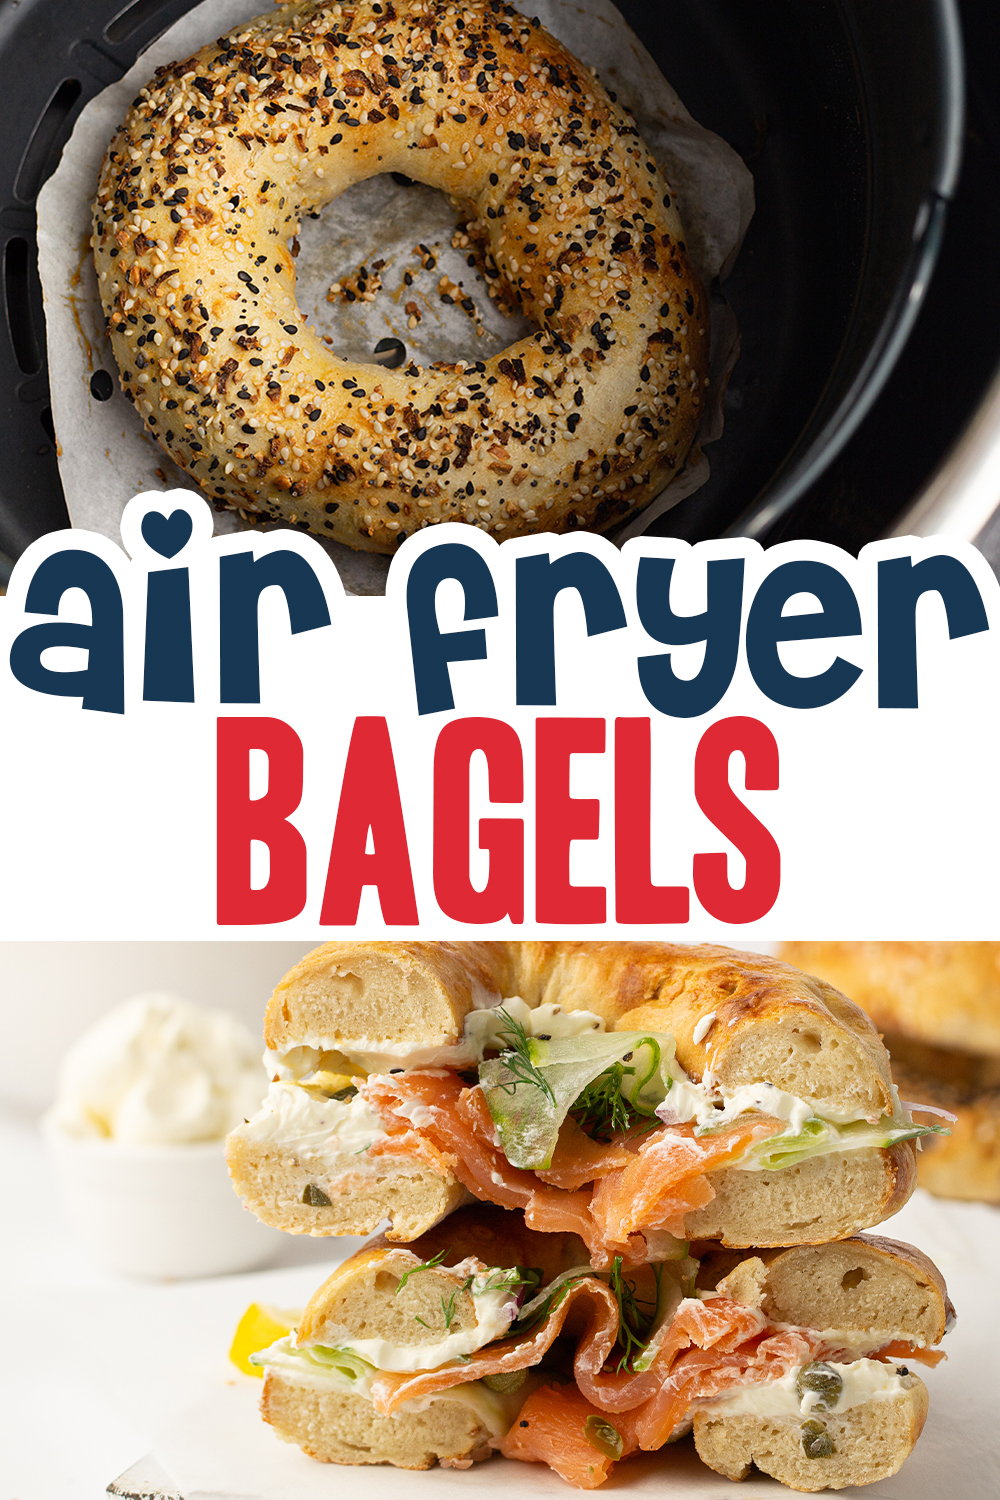 Great for breakfast, lunch, or a snack, you will love these fresh homemade bagels!